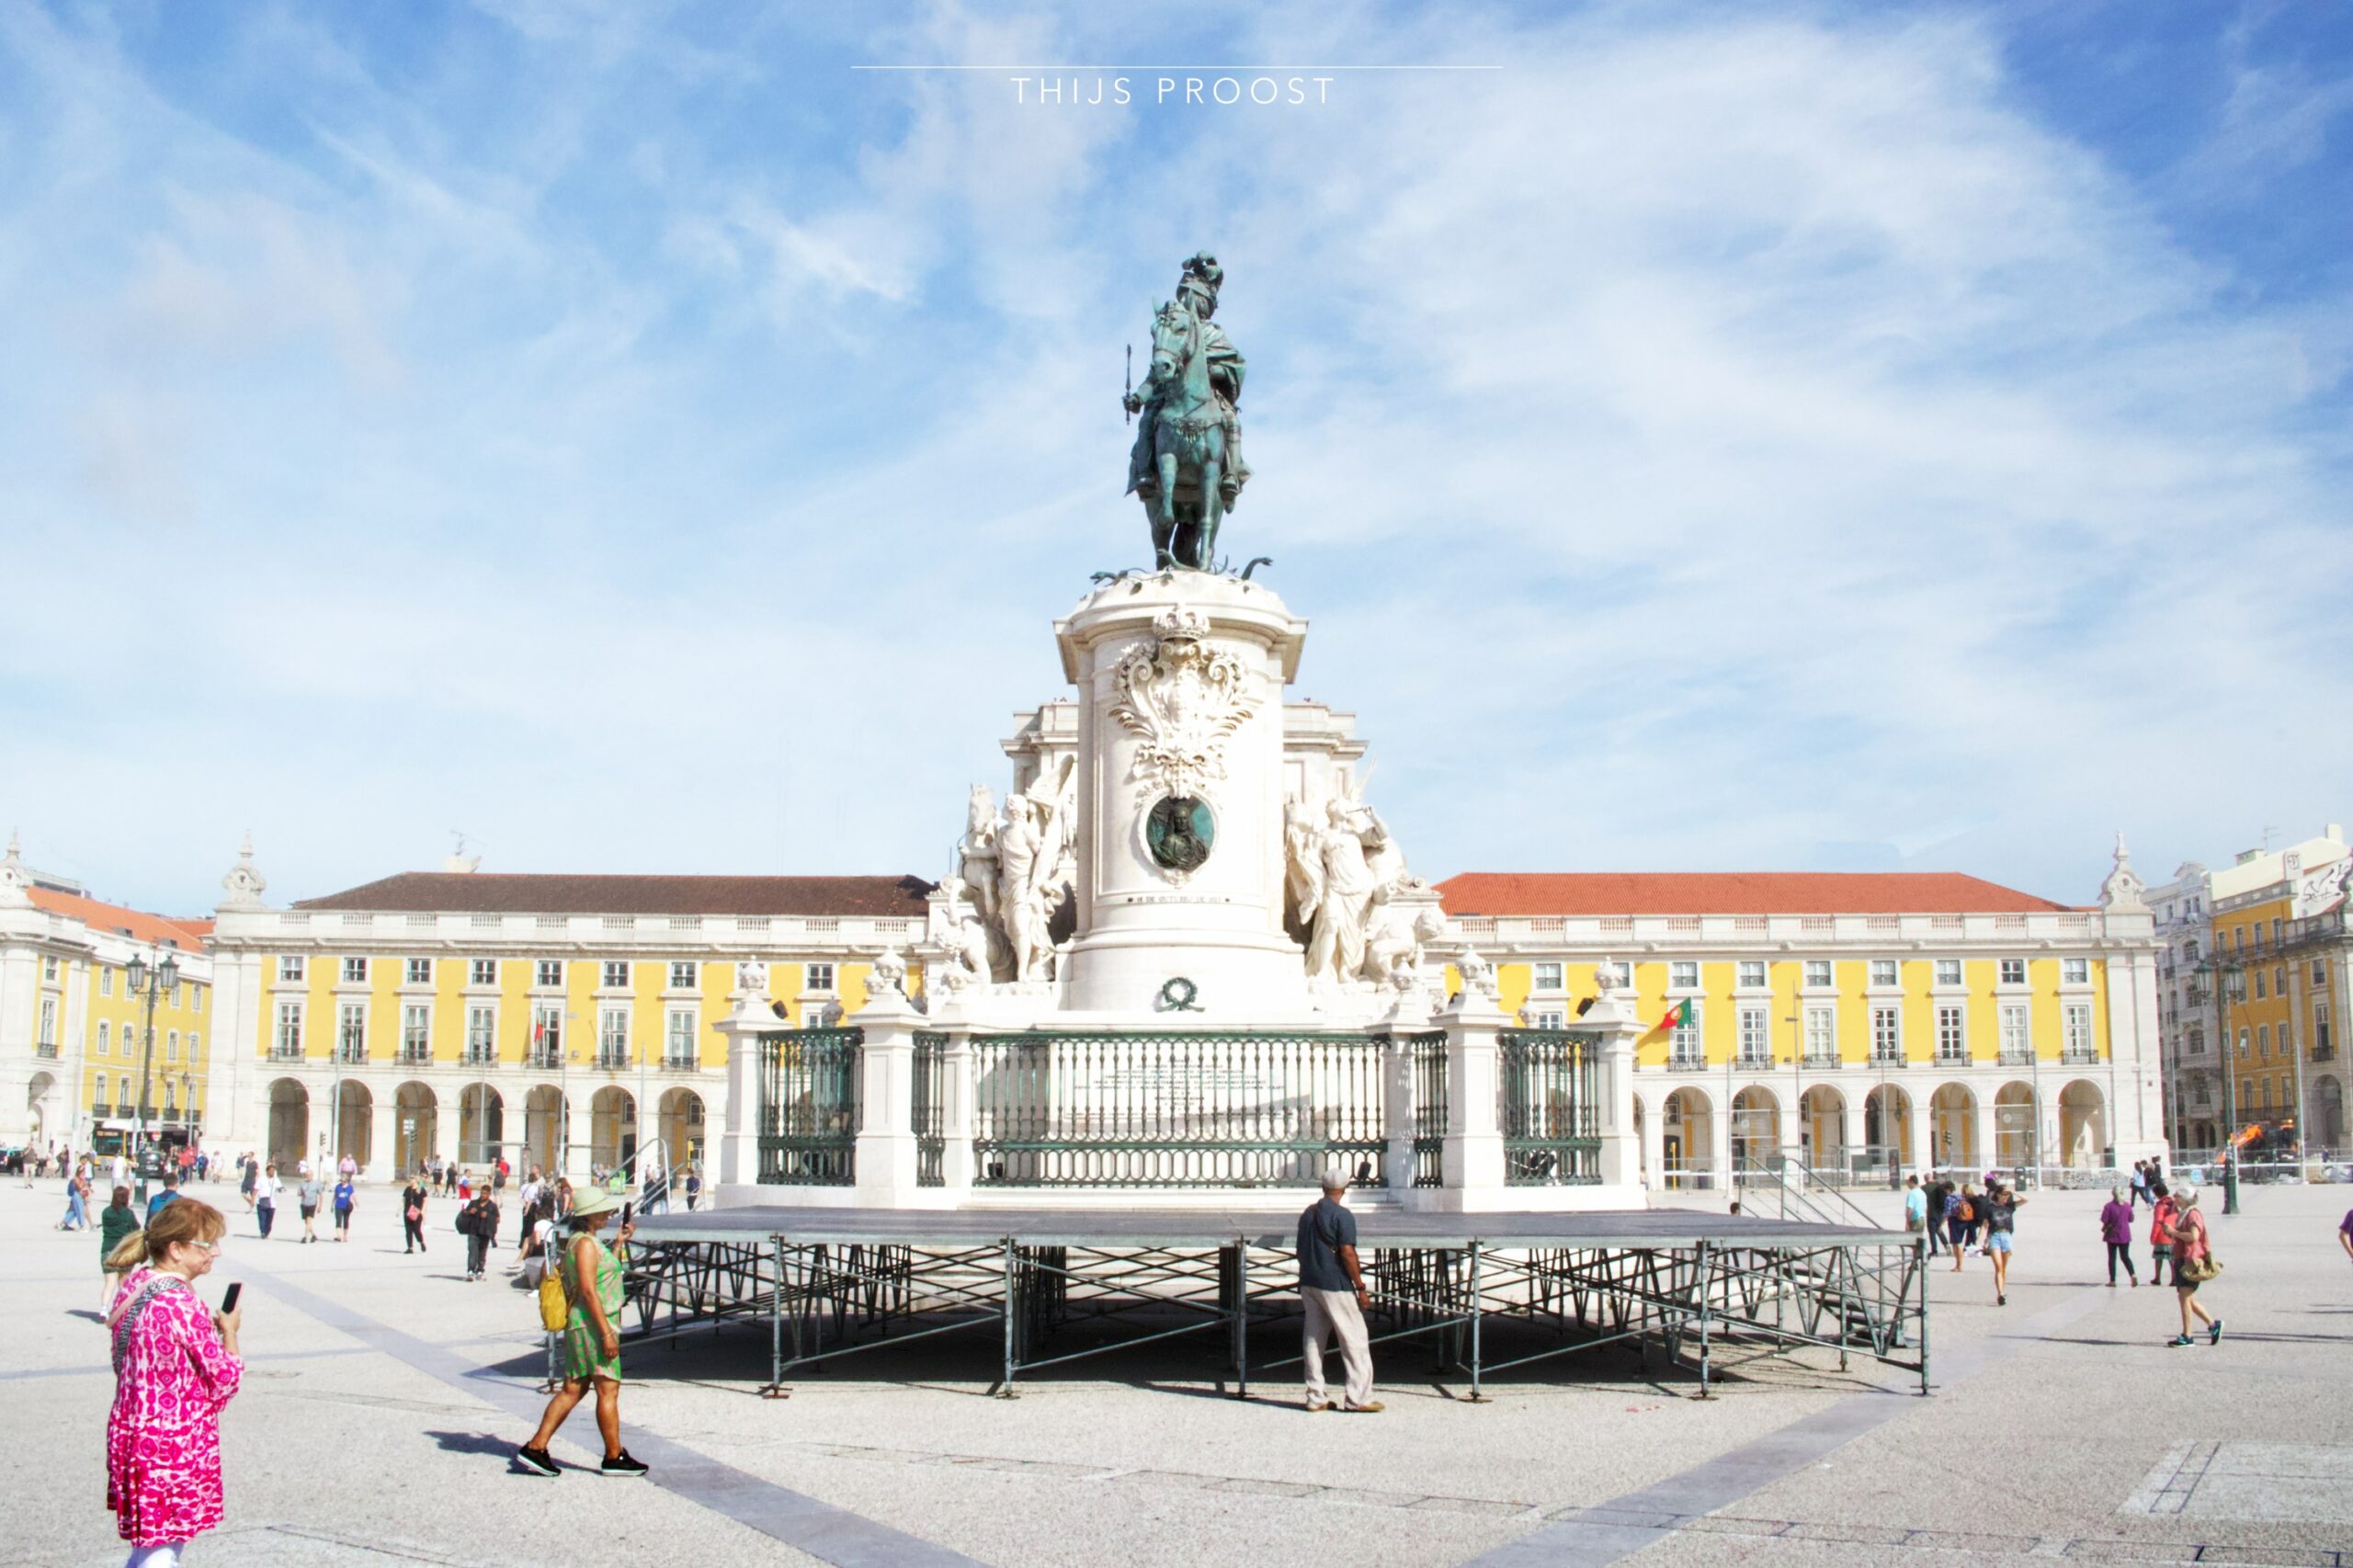 A view on the Statue of D. José I on Praça do comércio in Lisbon Portugal on a clear day.